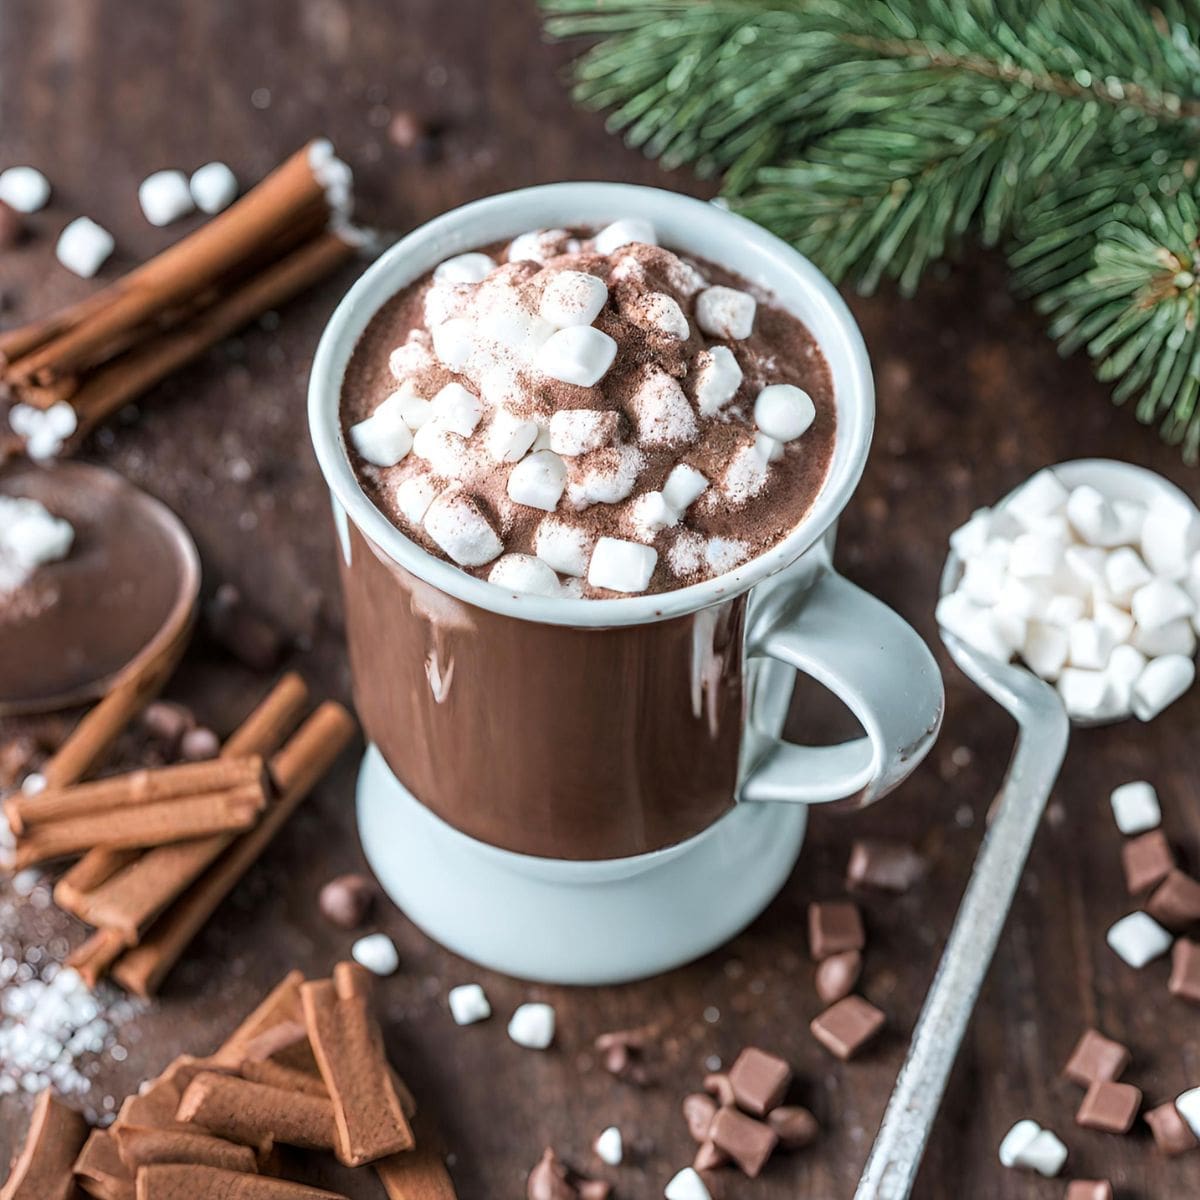 A cup of hot chocolate with marshmallows on top, on a wooden table.